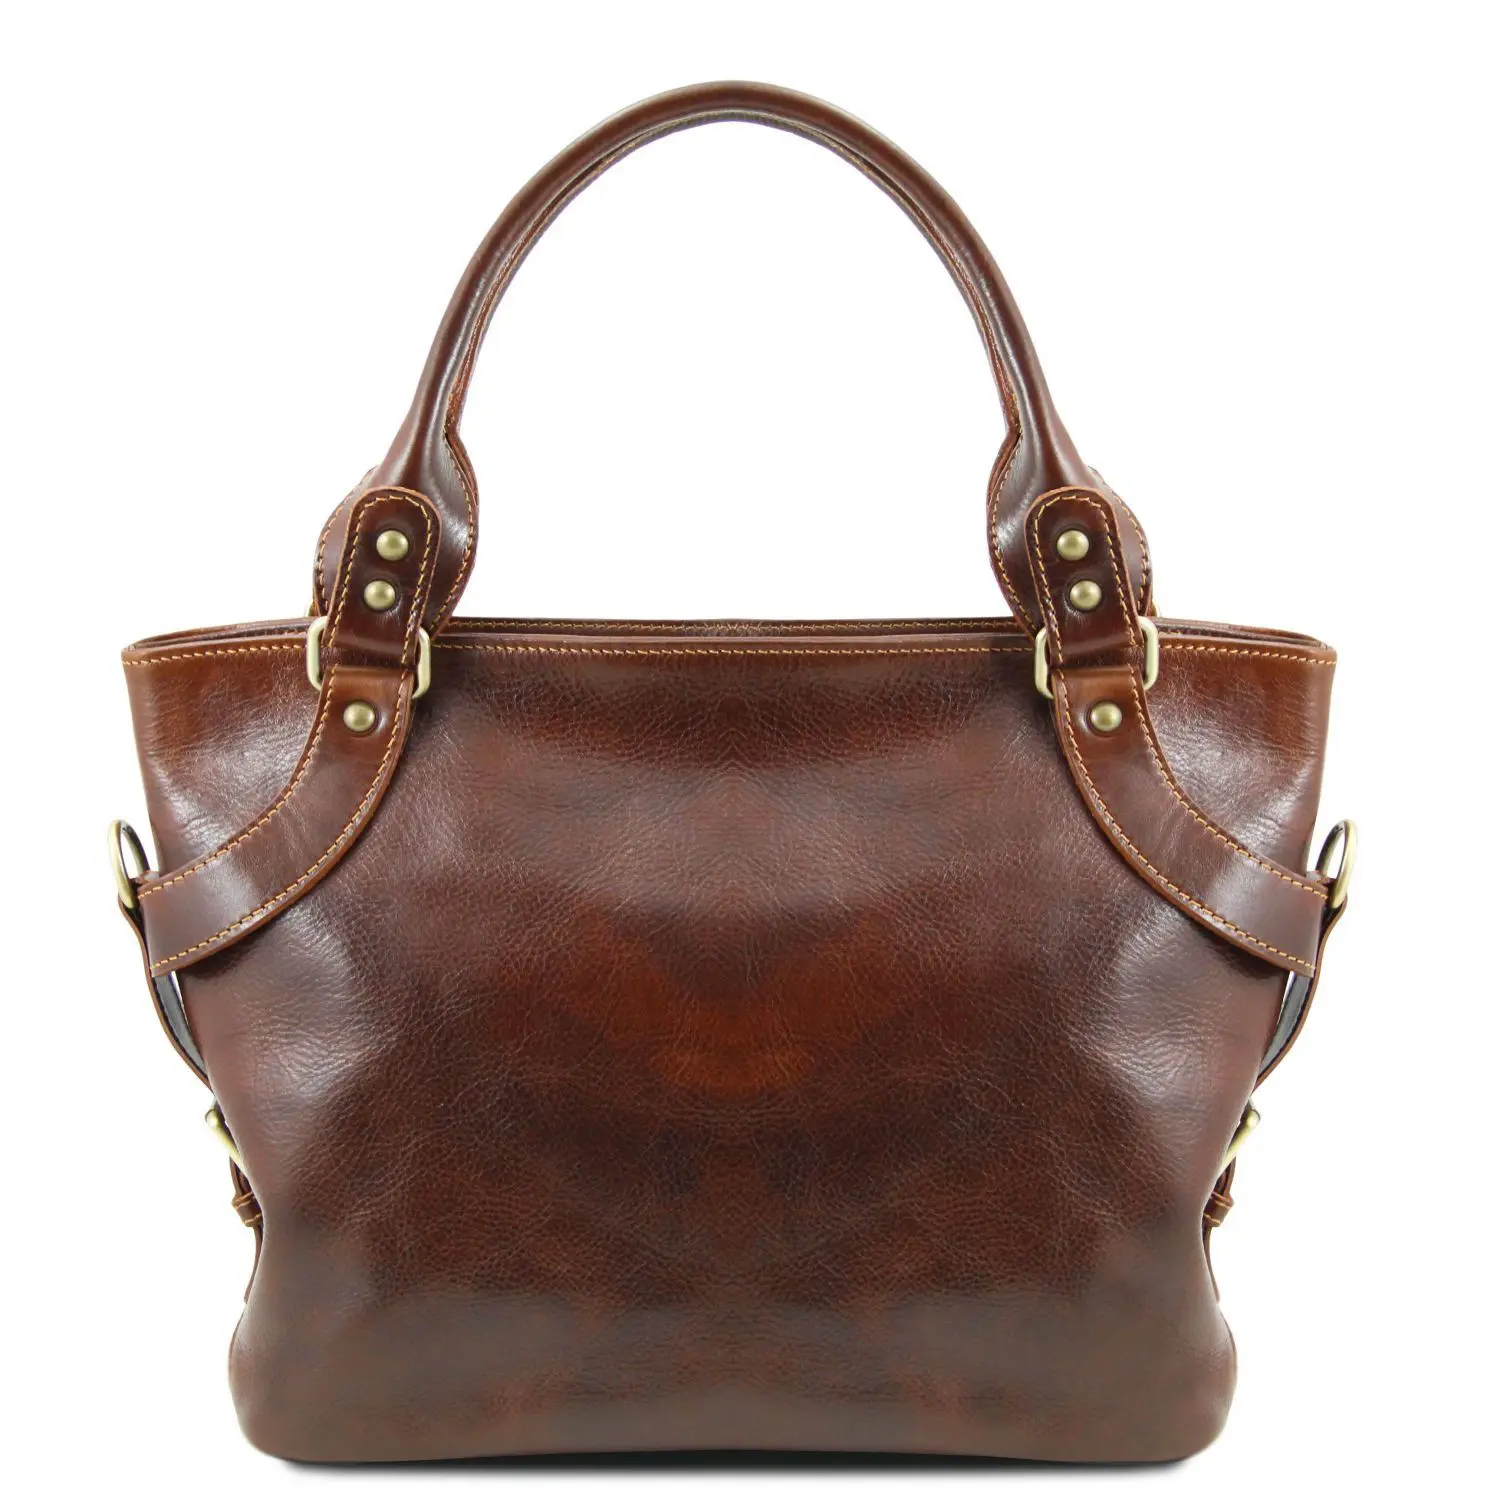 Brown grained leather tote bag